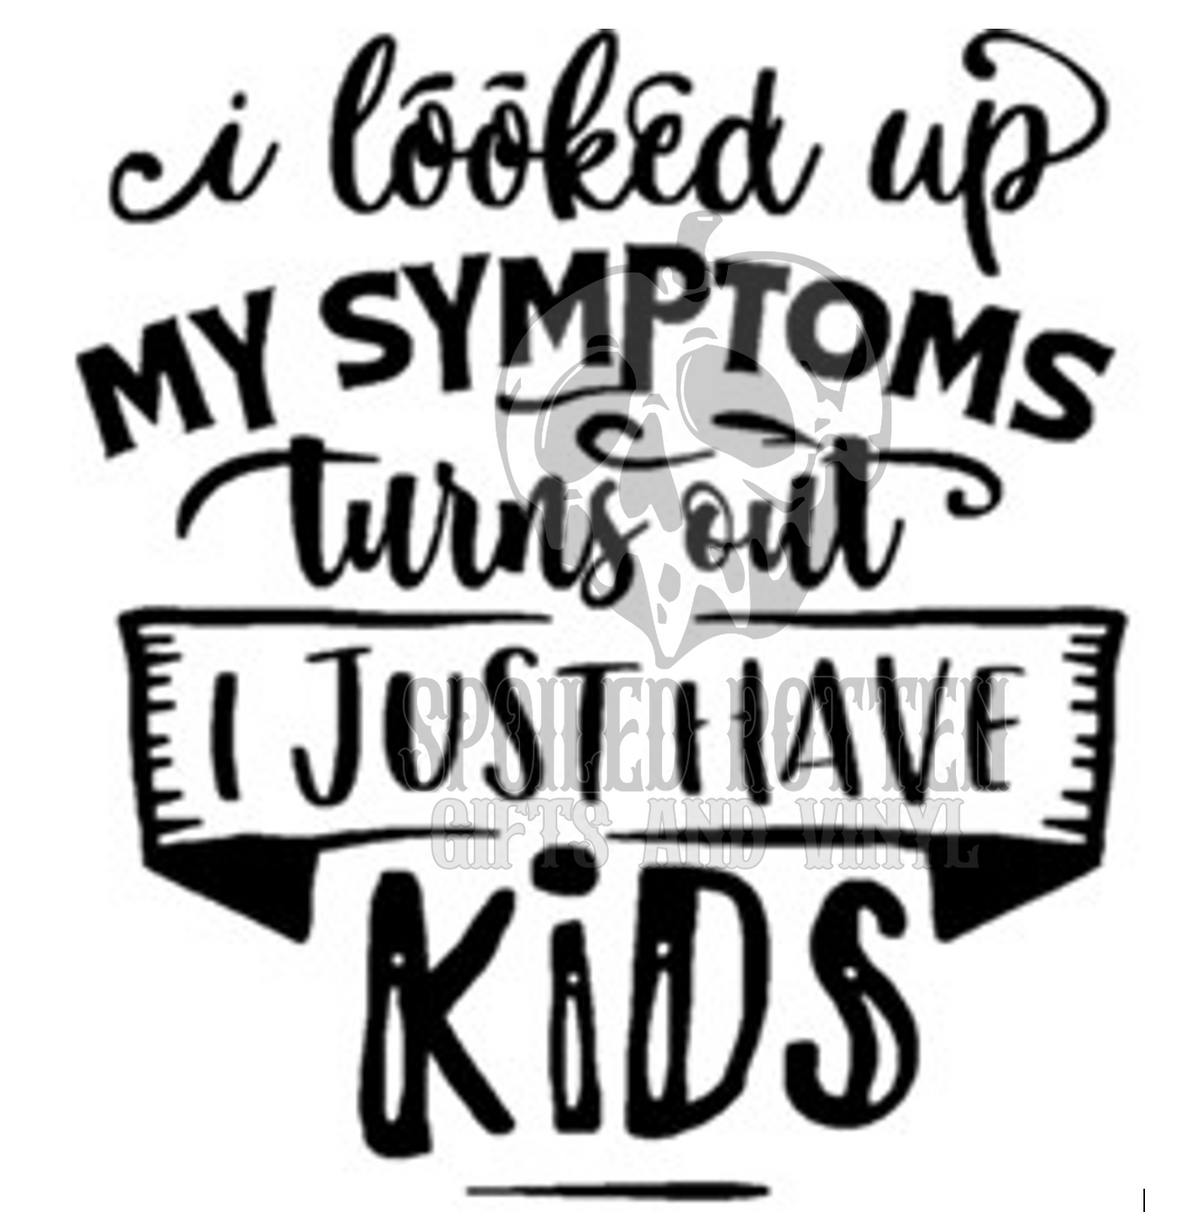 I Looked Up The Symptoms mom decal